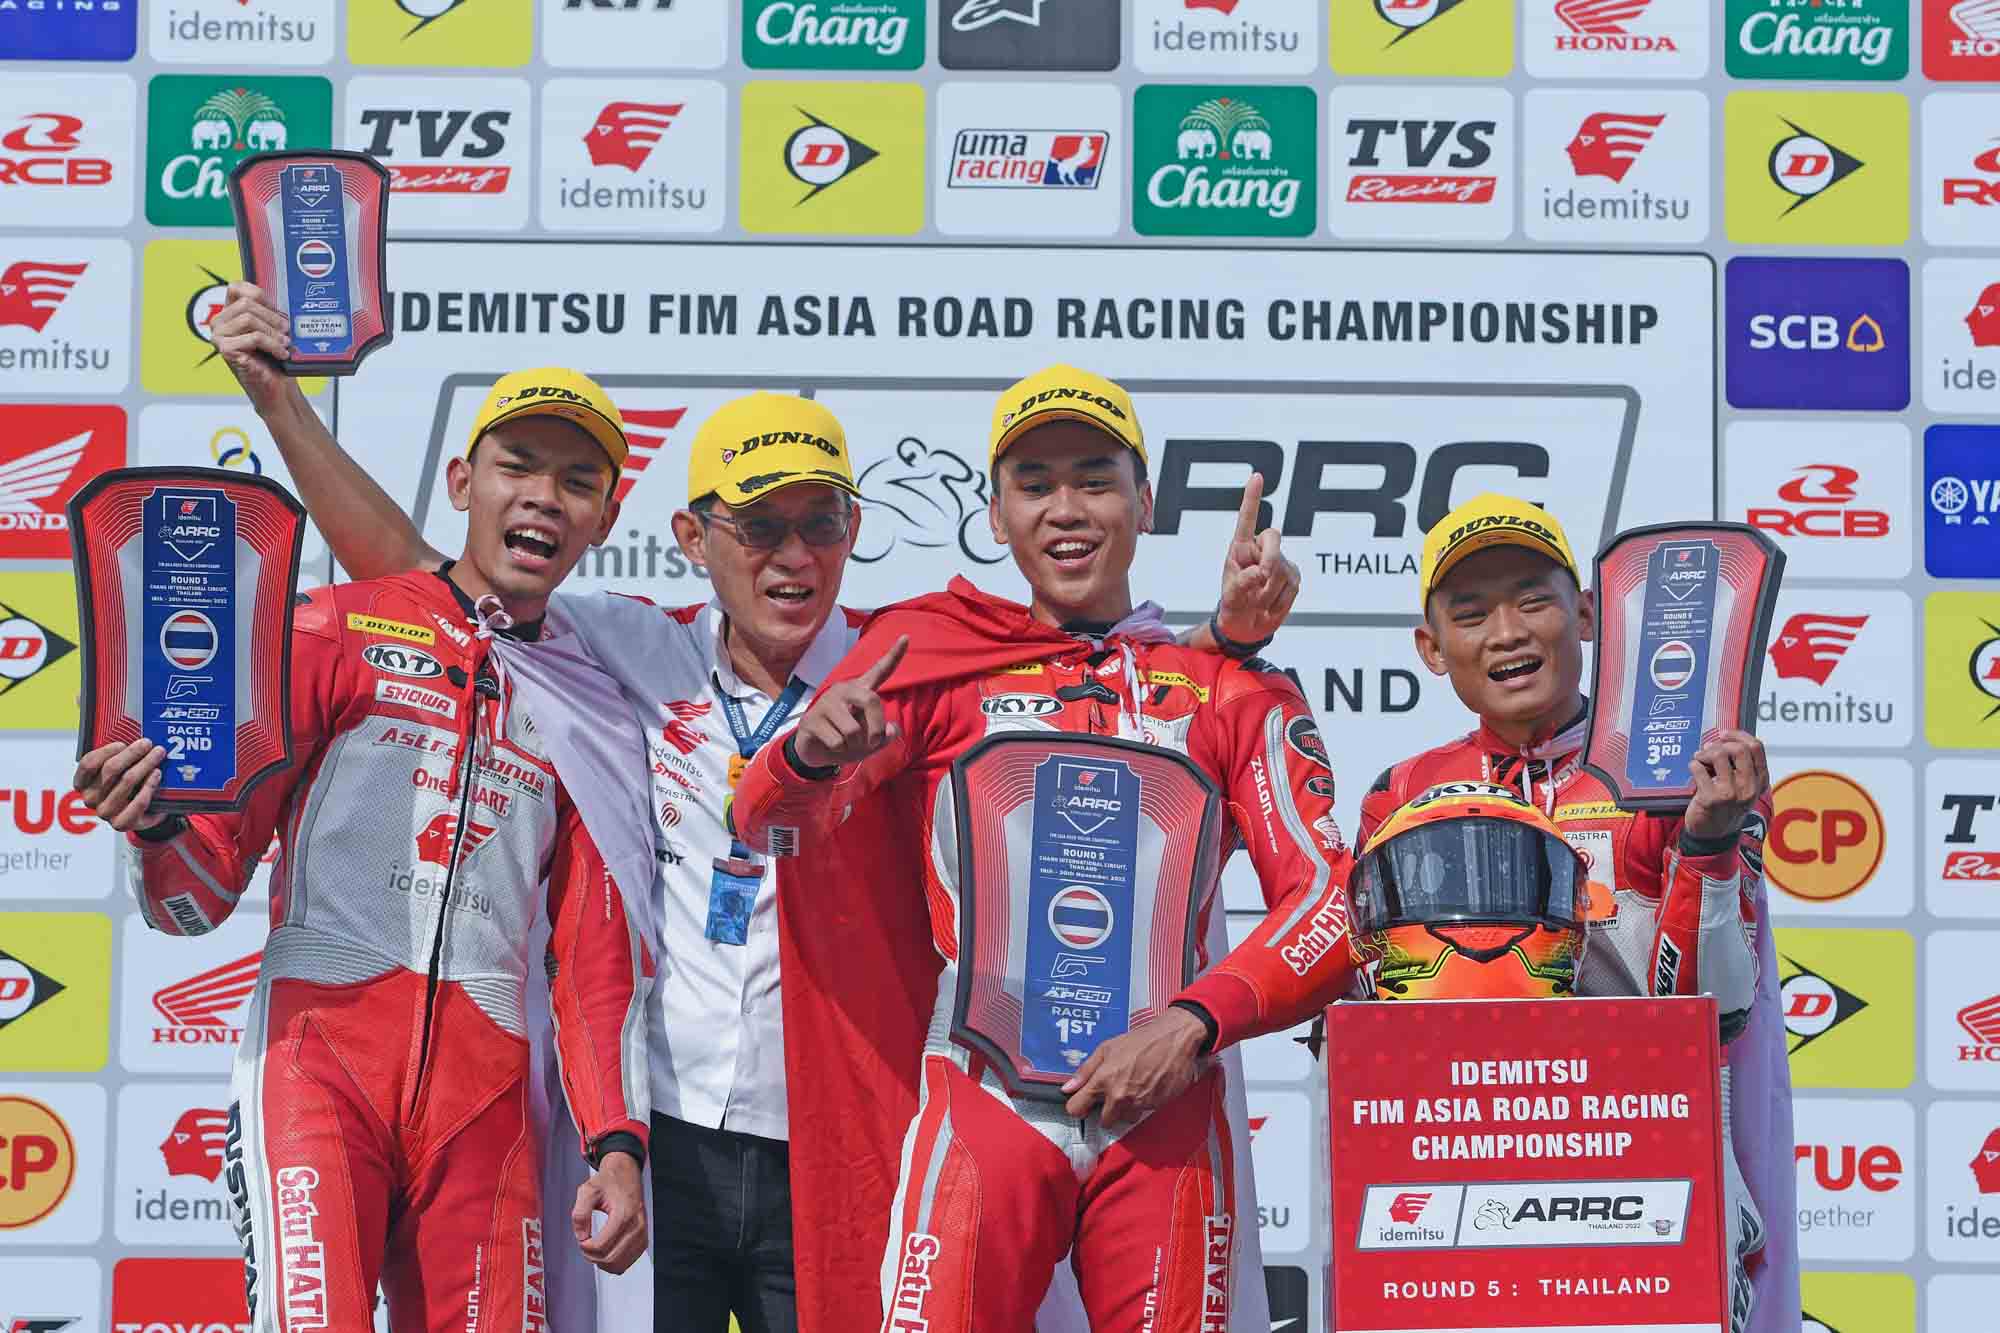 MOMENTOUS DAY FOR ASTRA HONDA RACING TEAM